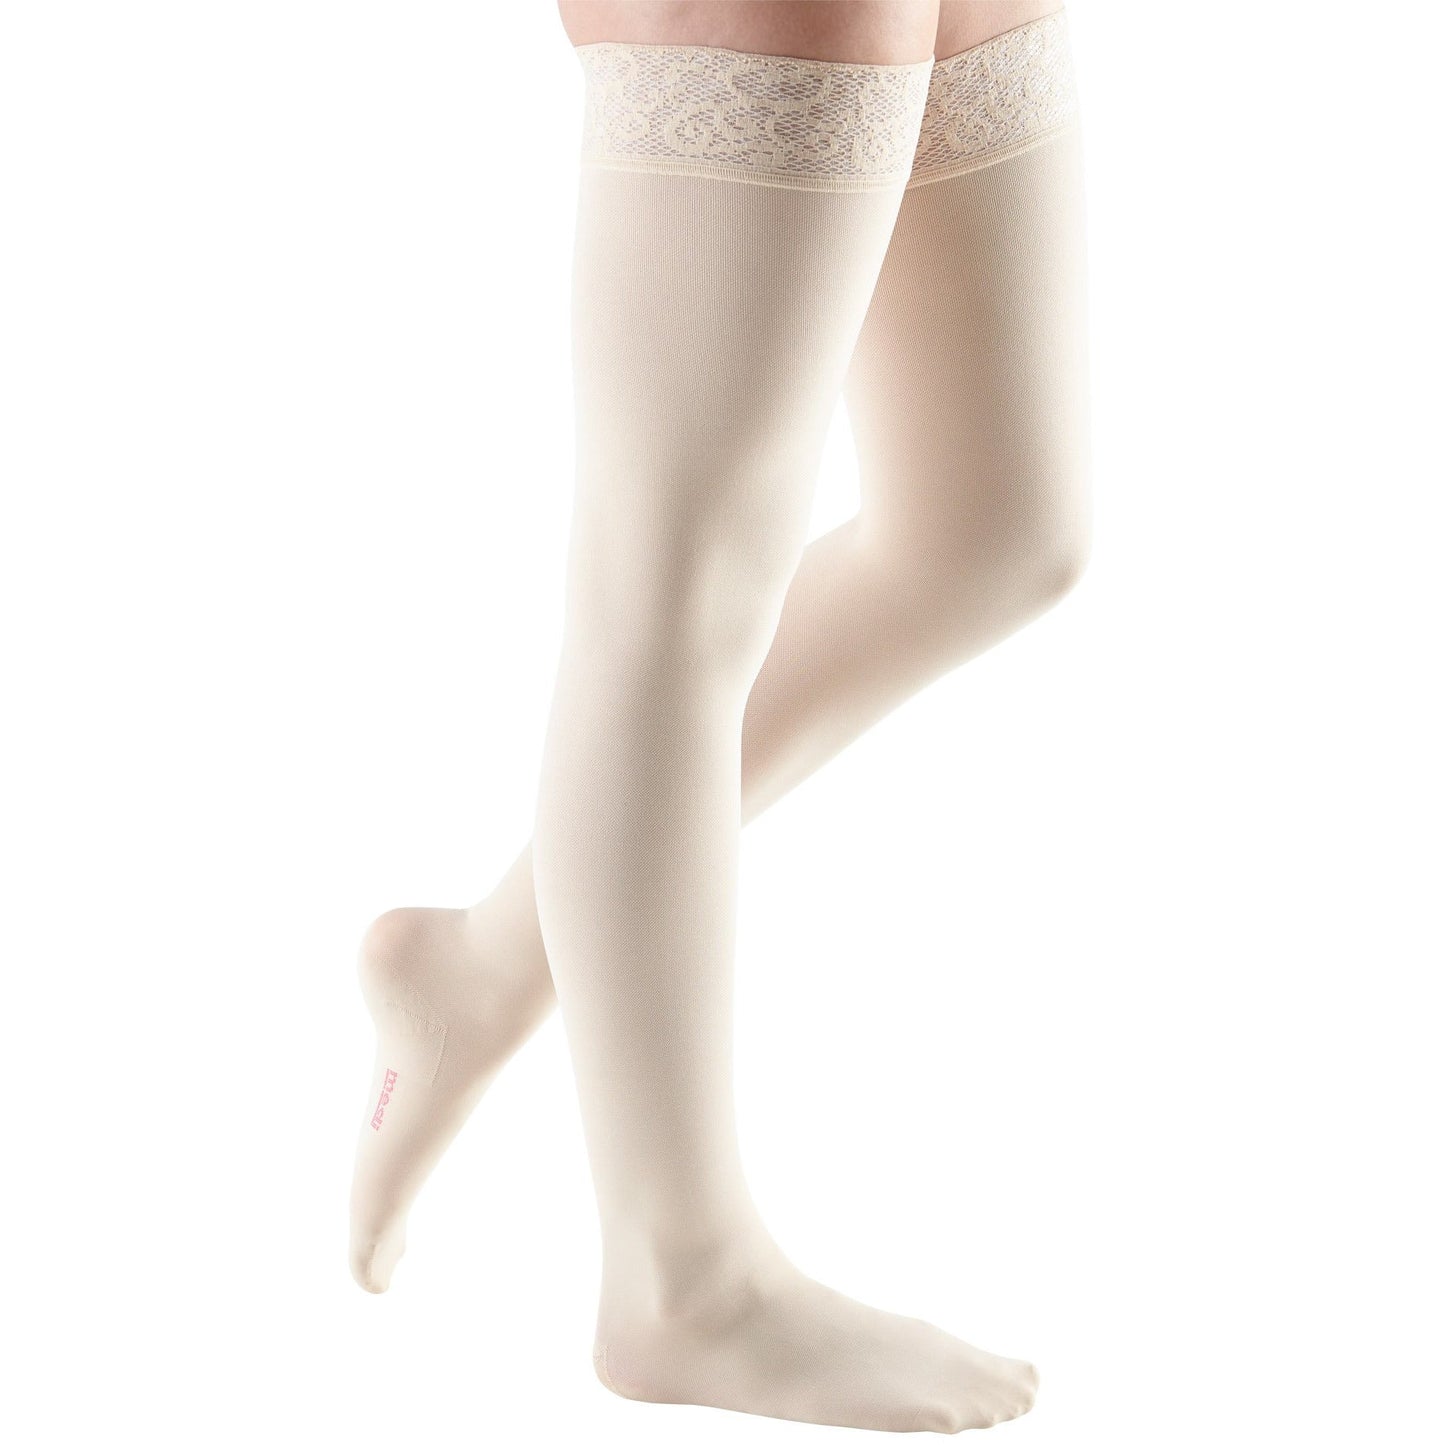 Mediven Comfort 20-30 mmHg Thigh High w/ Lace Silicone Top Band, Wheat